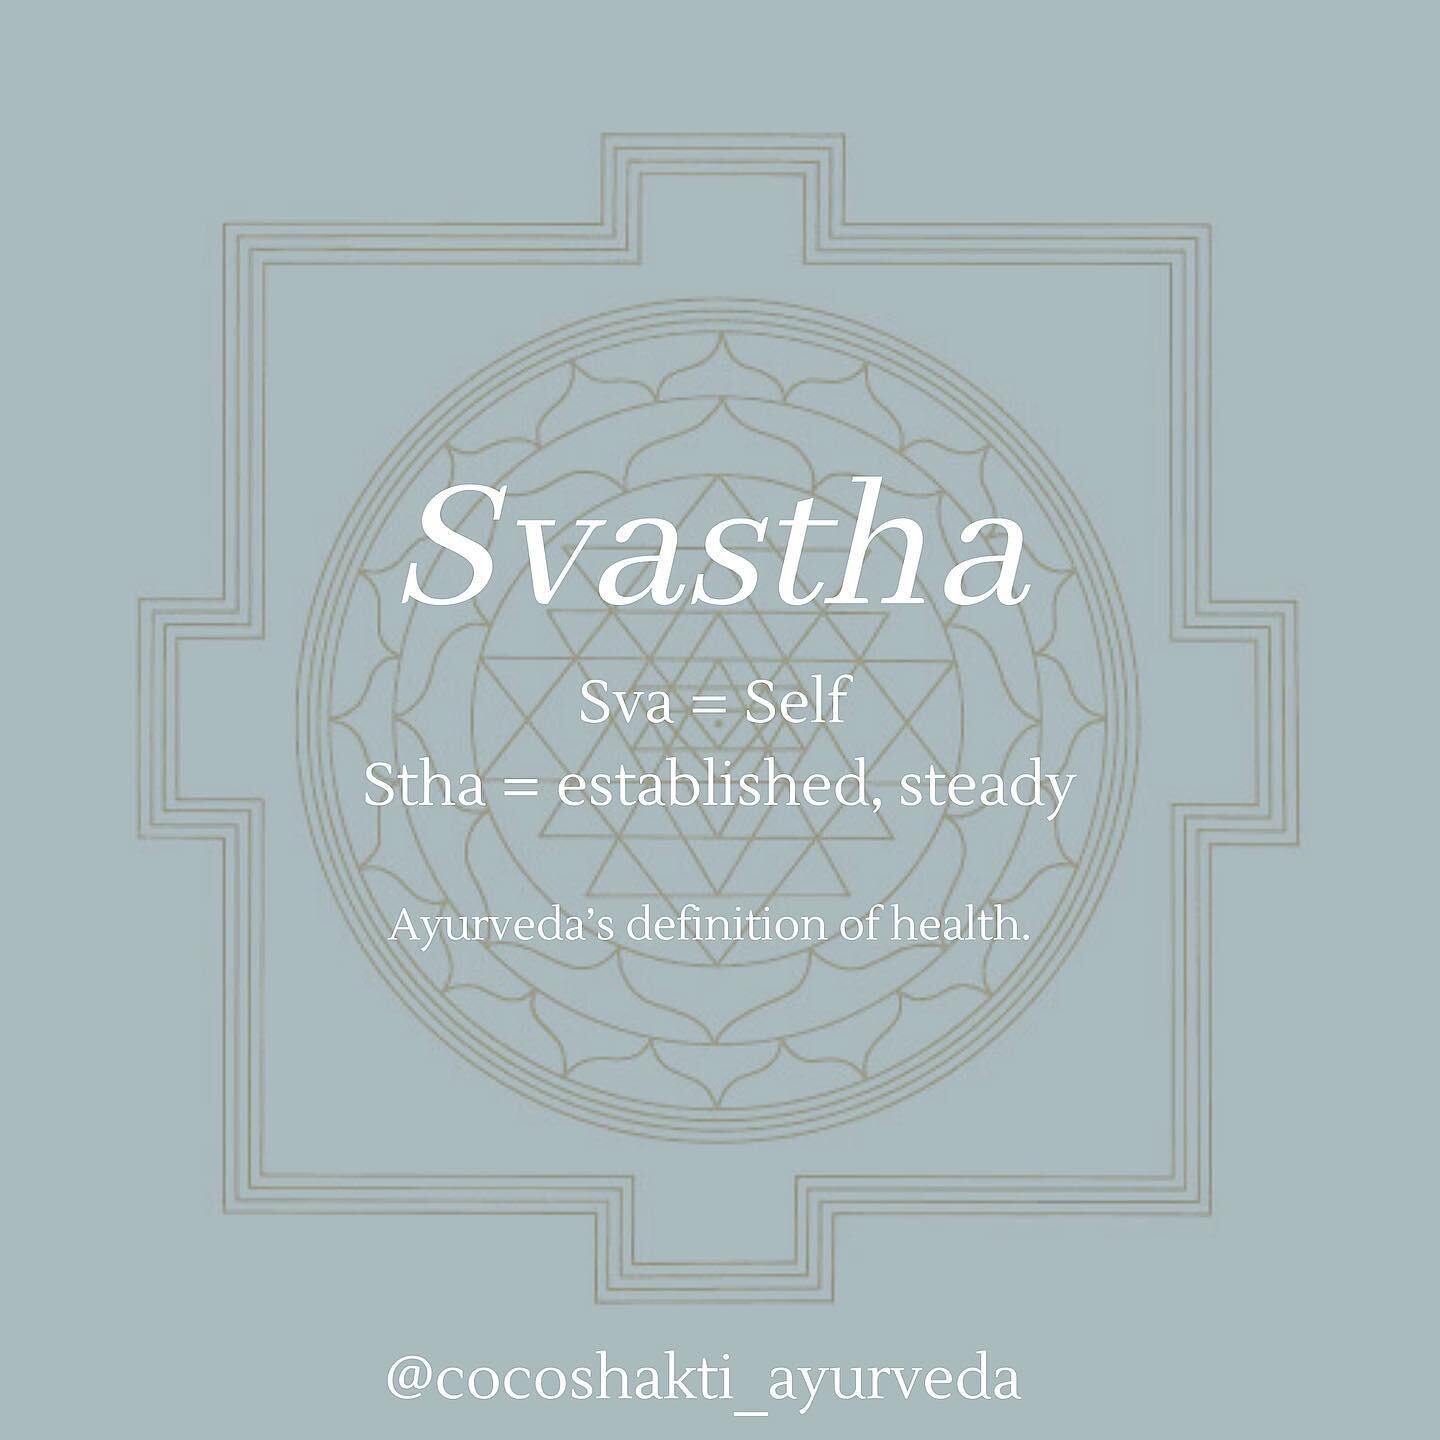 I&rsquo;ve been sitting with this deeply lately. 

What does it mean to be established in Self? 

Ayurveda teaches us that #Svastha is the divine union of the earth self and the God Self. Essentially this is Soul befriending the Ego. When these two a